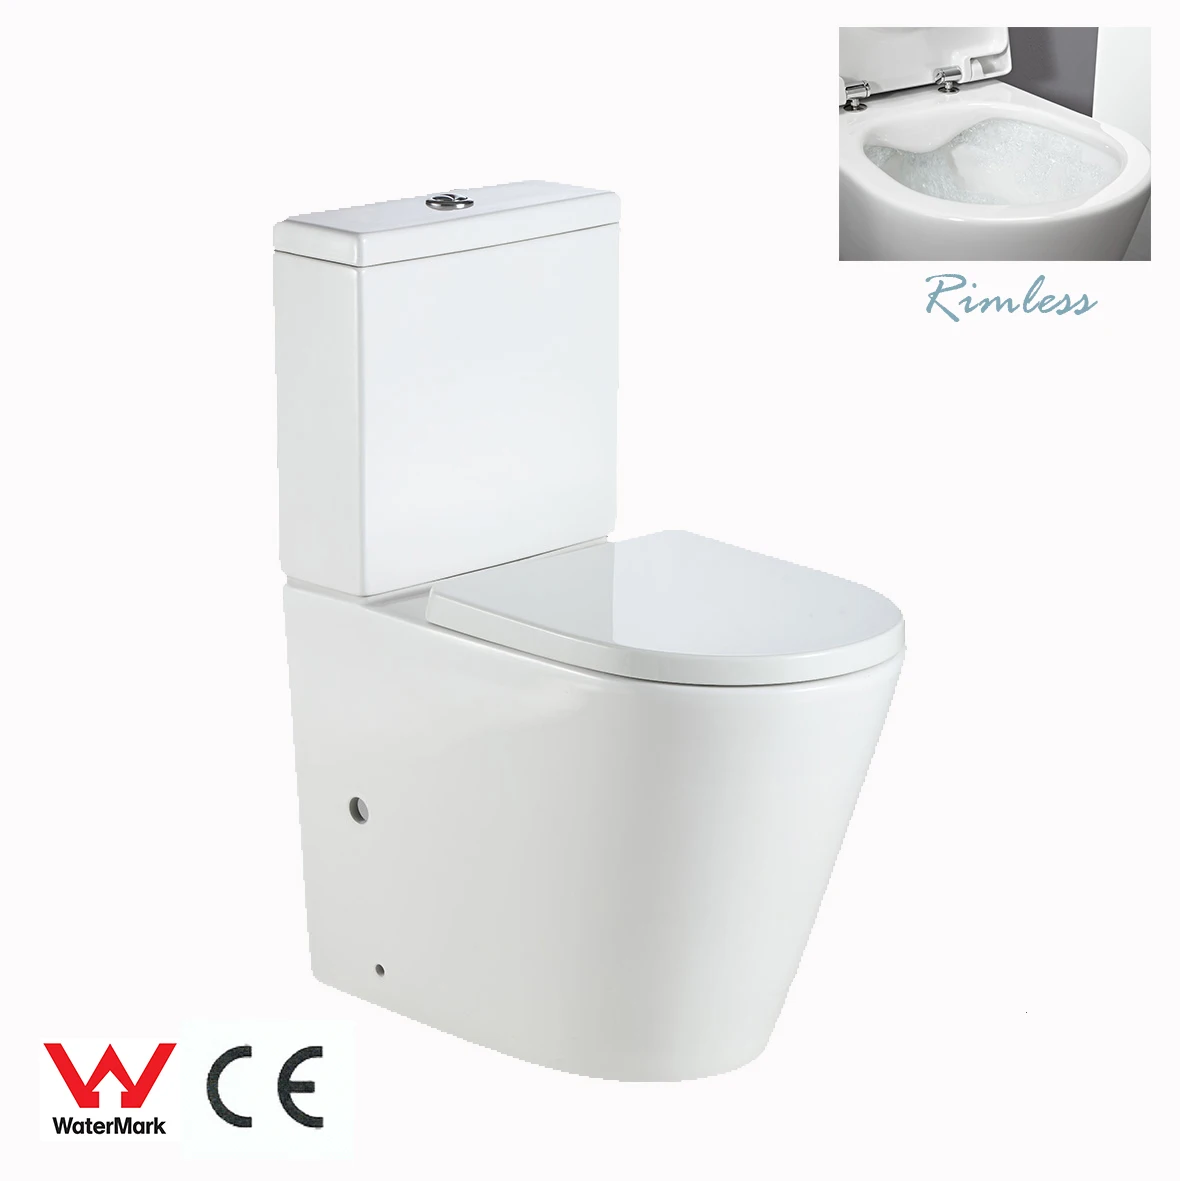 European Standard Comfort Height Toilet WC Closed Coupled Toilet WC Luxury Disabled Eldery WC Soft Close Seat Toilet Bowl